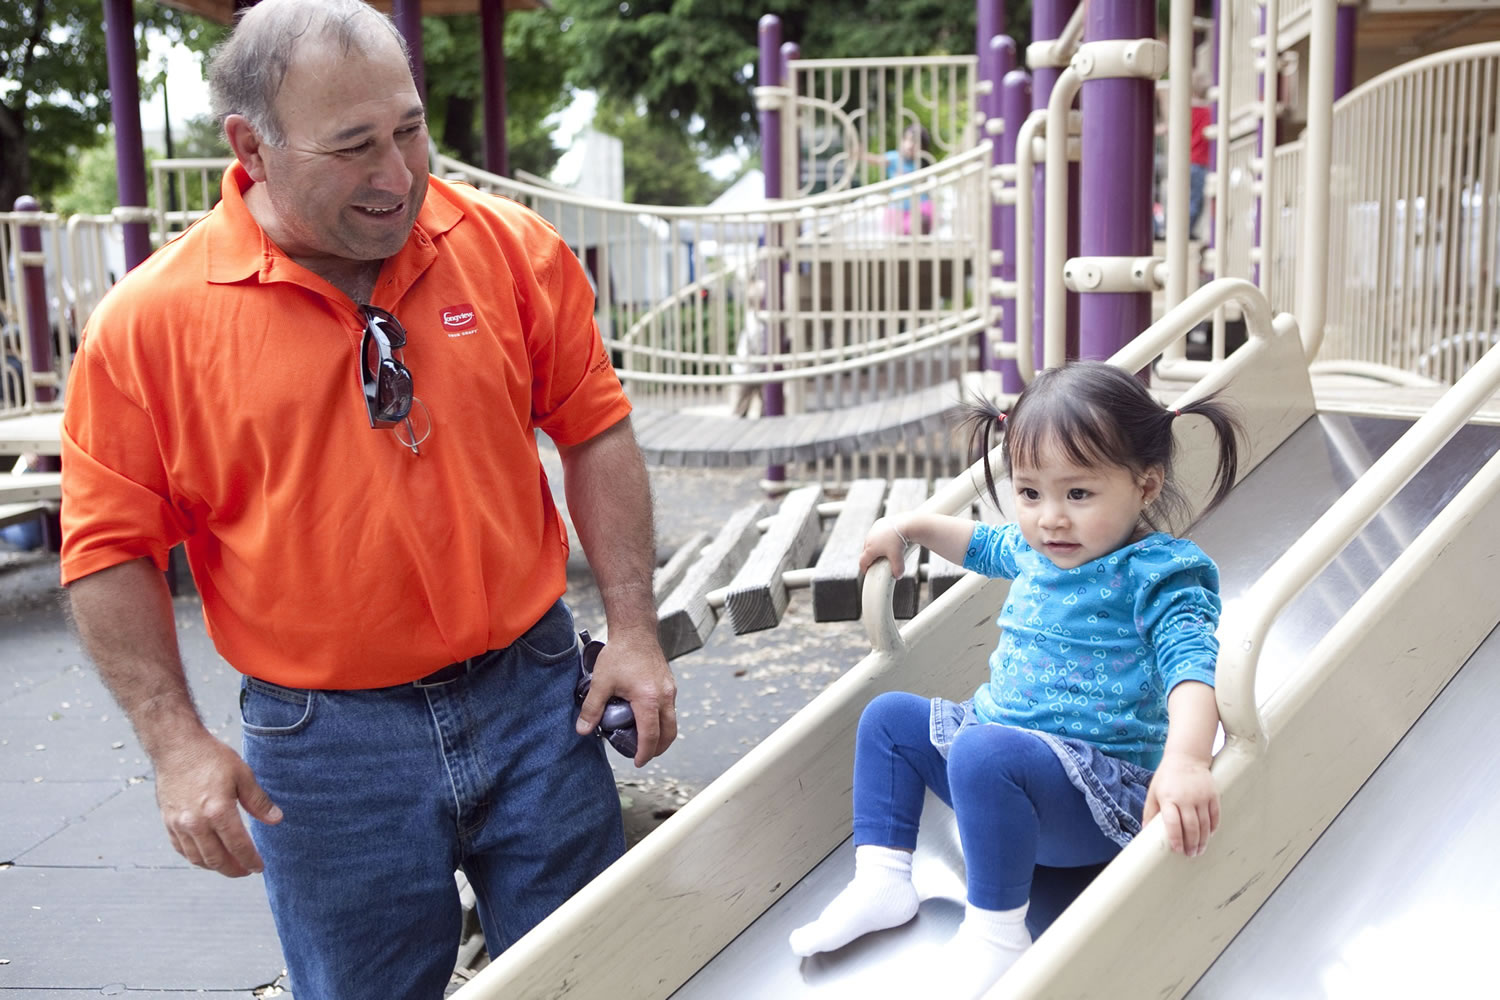 Abraham Escobedo, 53, of Hazel Dell spends time with his 1 1/2 -year-old daughter, Gabriella, at Esther Short Park on Father's Day.